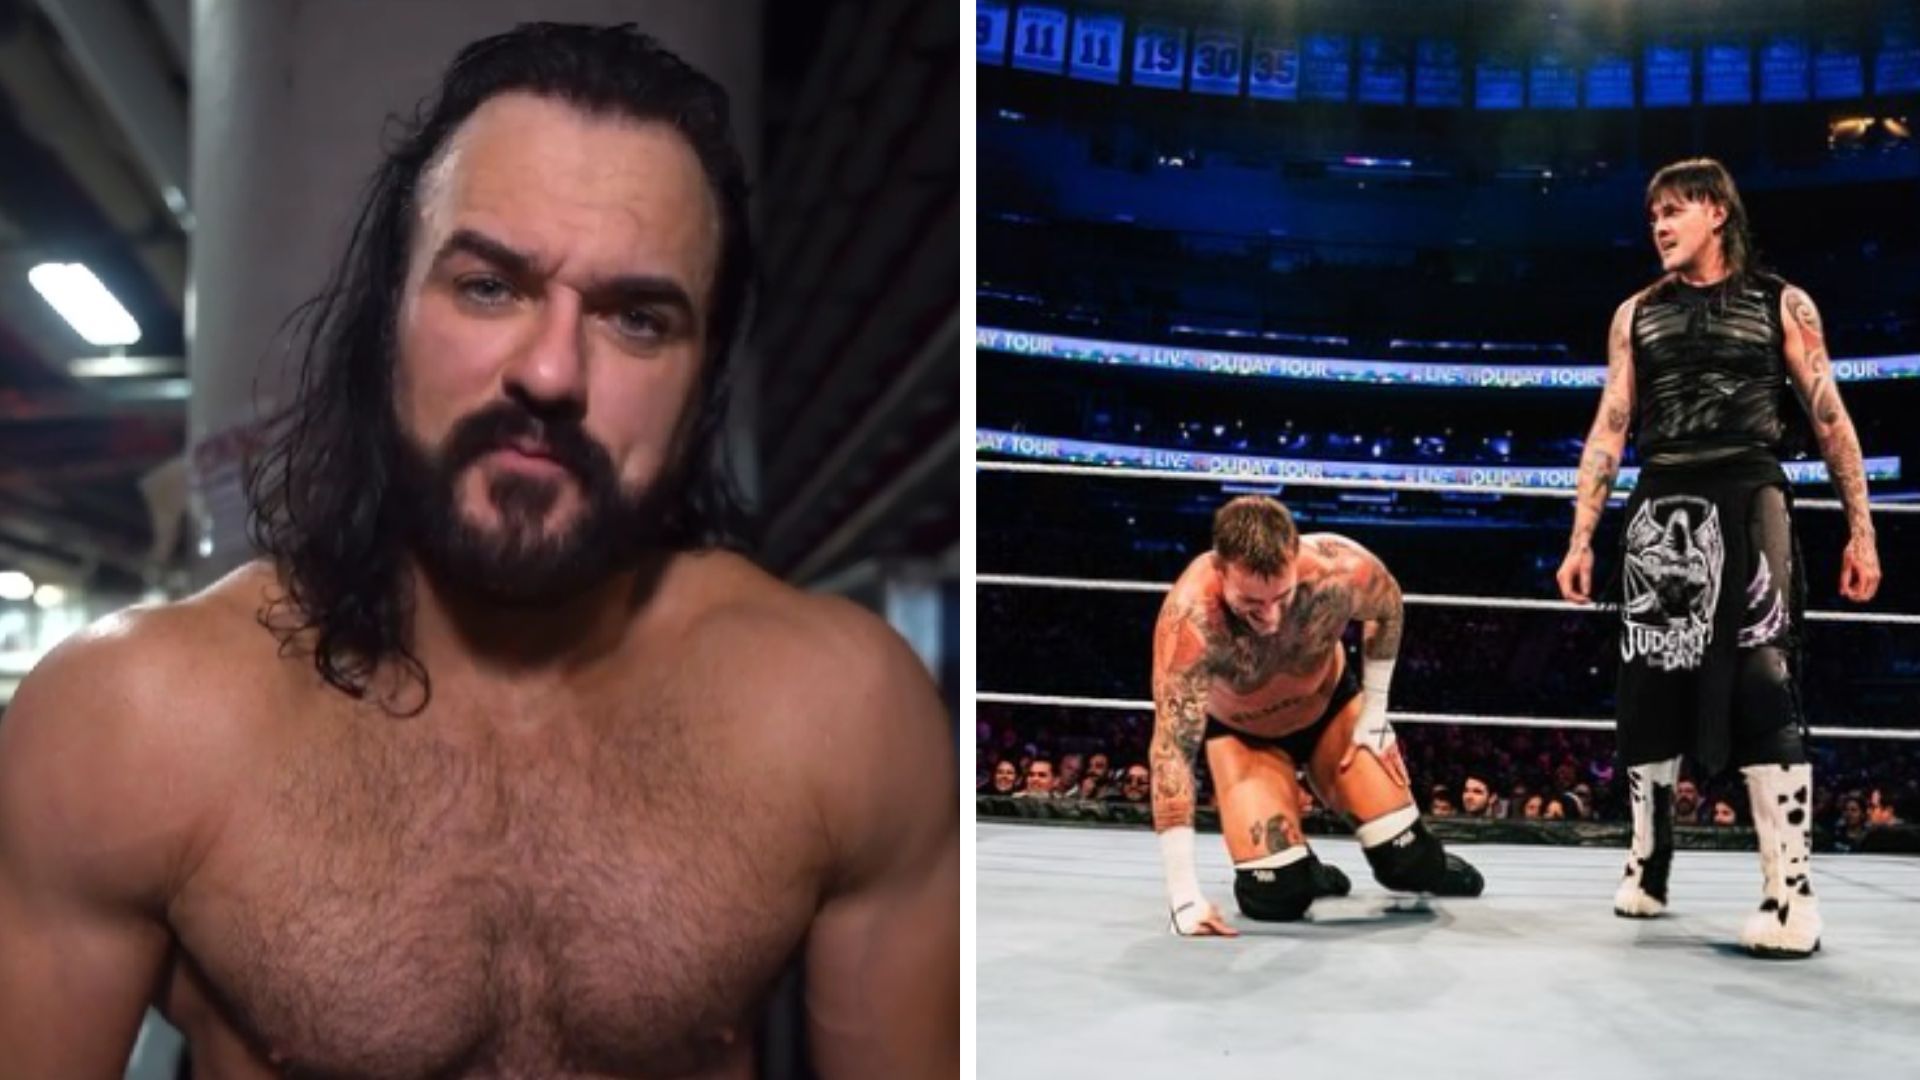 Drew McIntyre on the left, Dominik Mysterio and CM Punk on the right